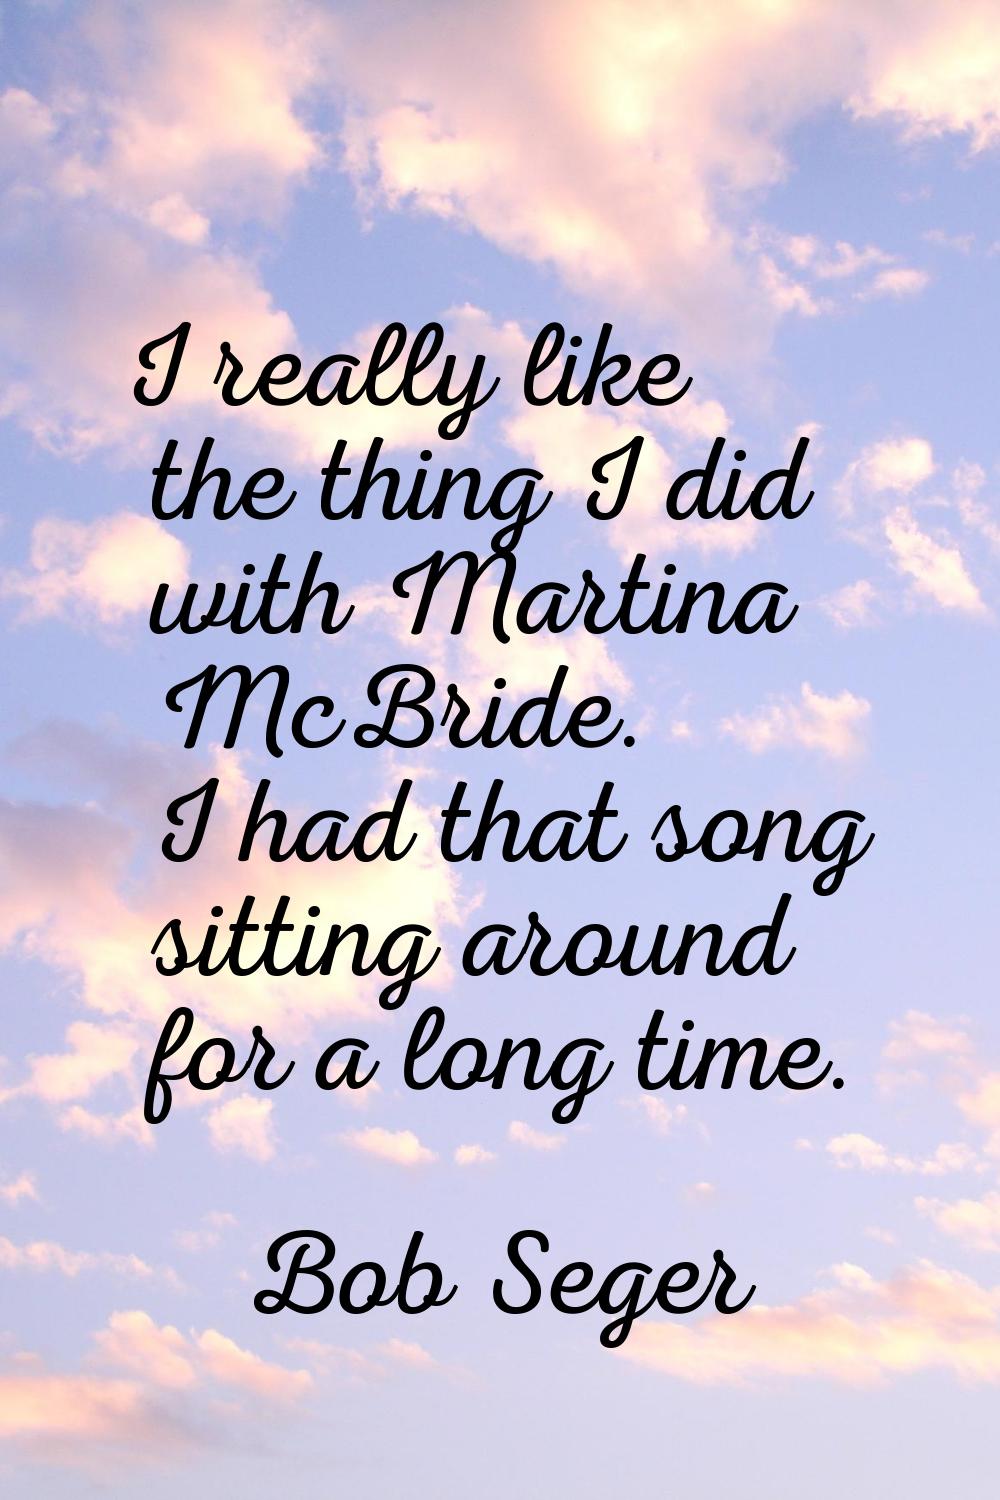 I really like the thing I did with Martina McBride. I had that song sitting around for a long time.